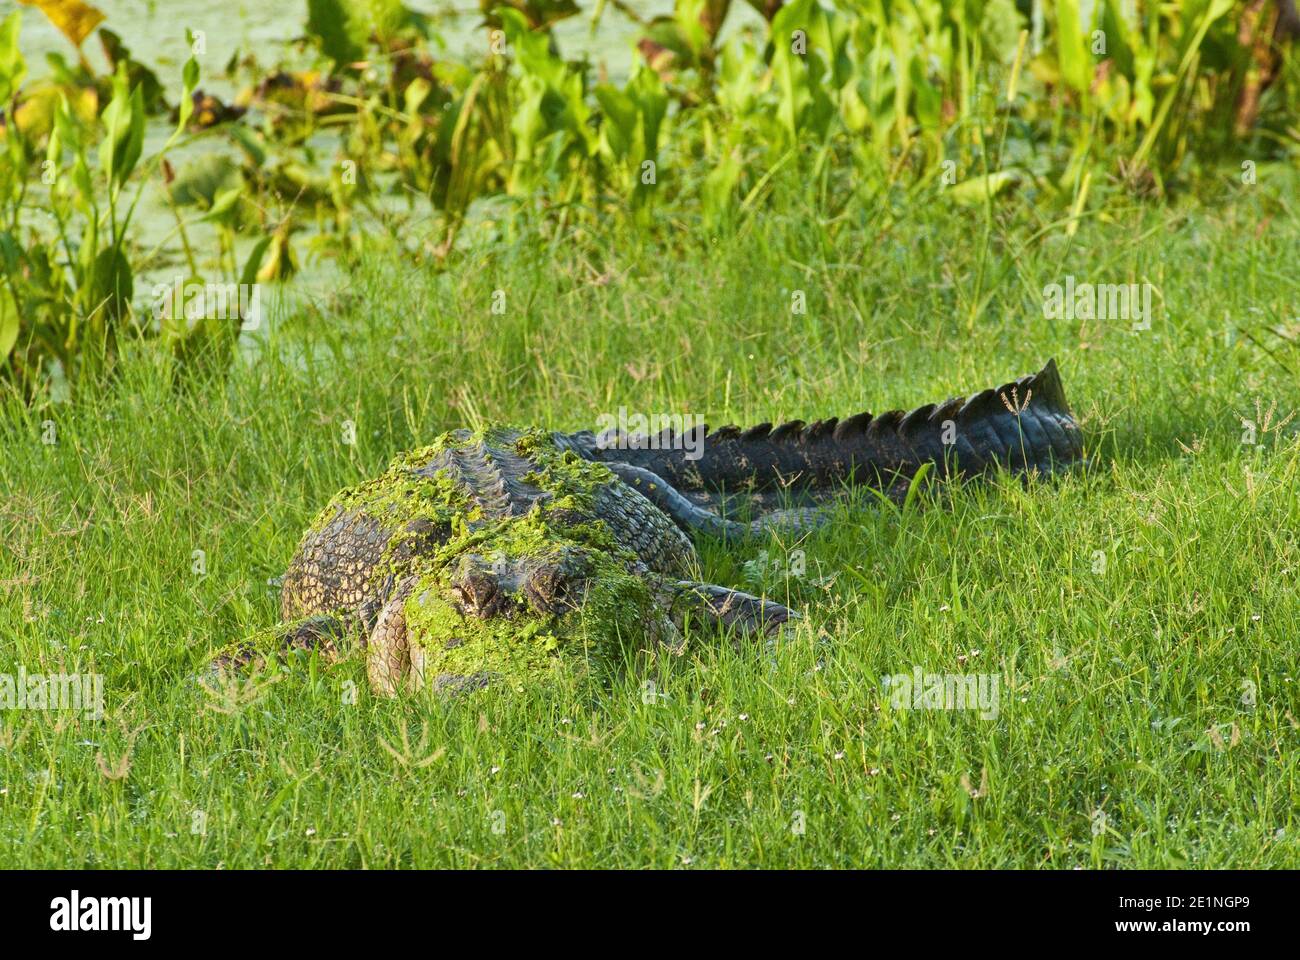 American alligator covered with duckweeds (lemna) at Elm Lake in Brazos Bend State Park near Houston, Texas, USA Stock Photo